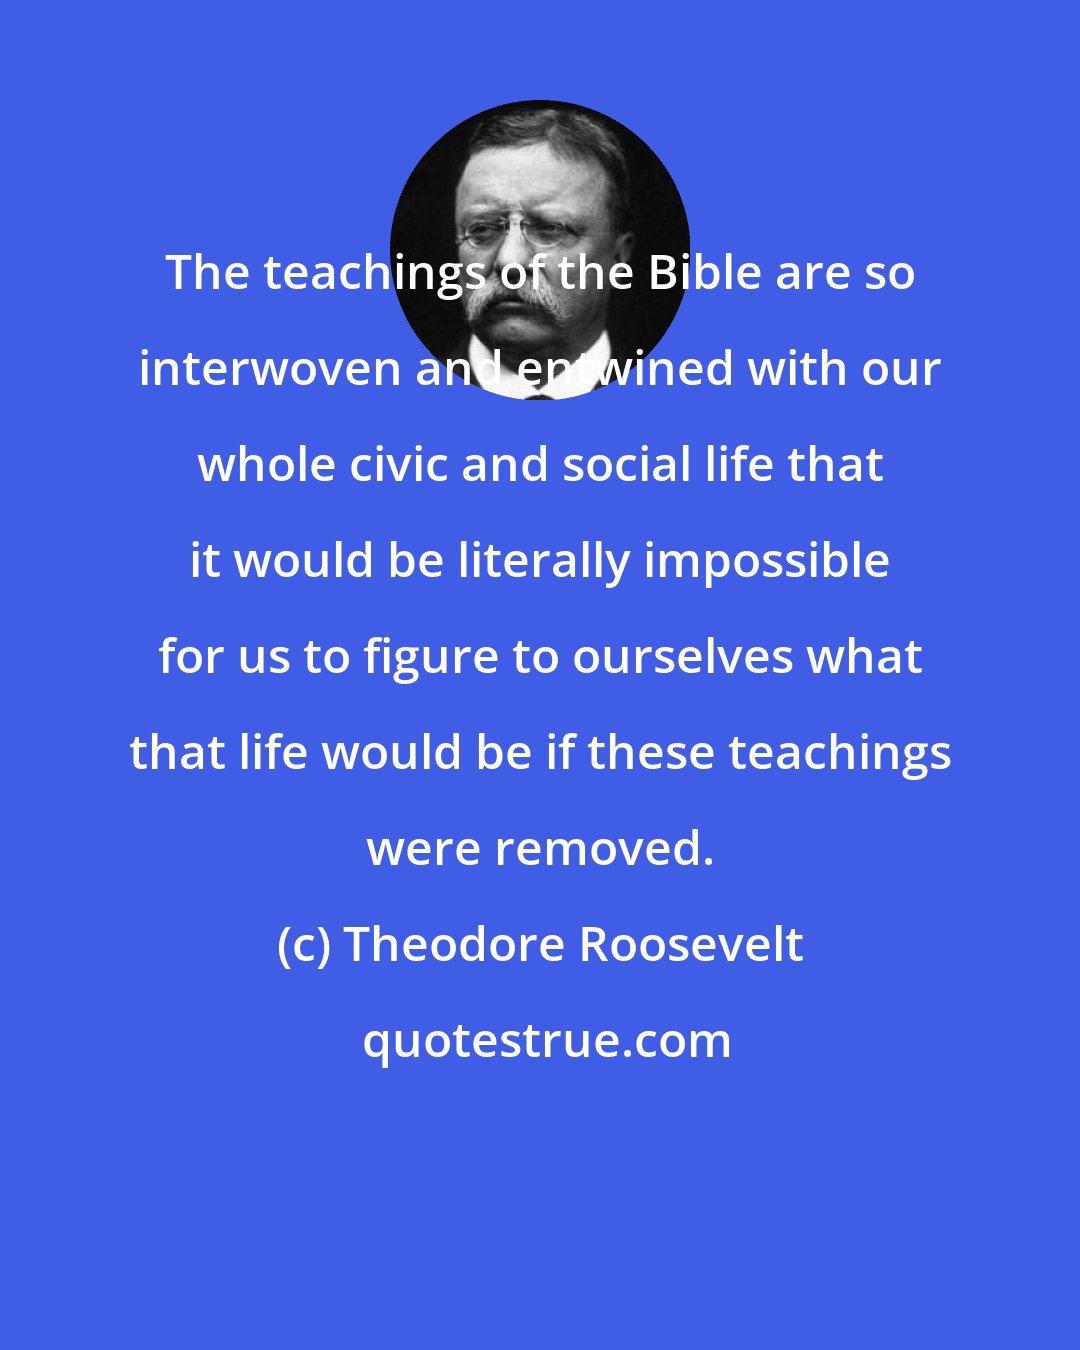 Theodore Roosevelt: The teachings of the Bible are so interwoven and entwined with our whole civic and social life that it would be literally impossible for us to figure to ourselves what that life would be if these teachings were removed.